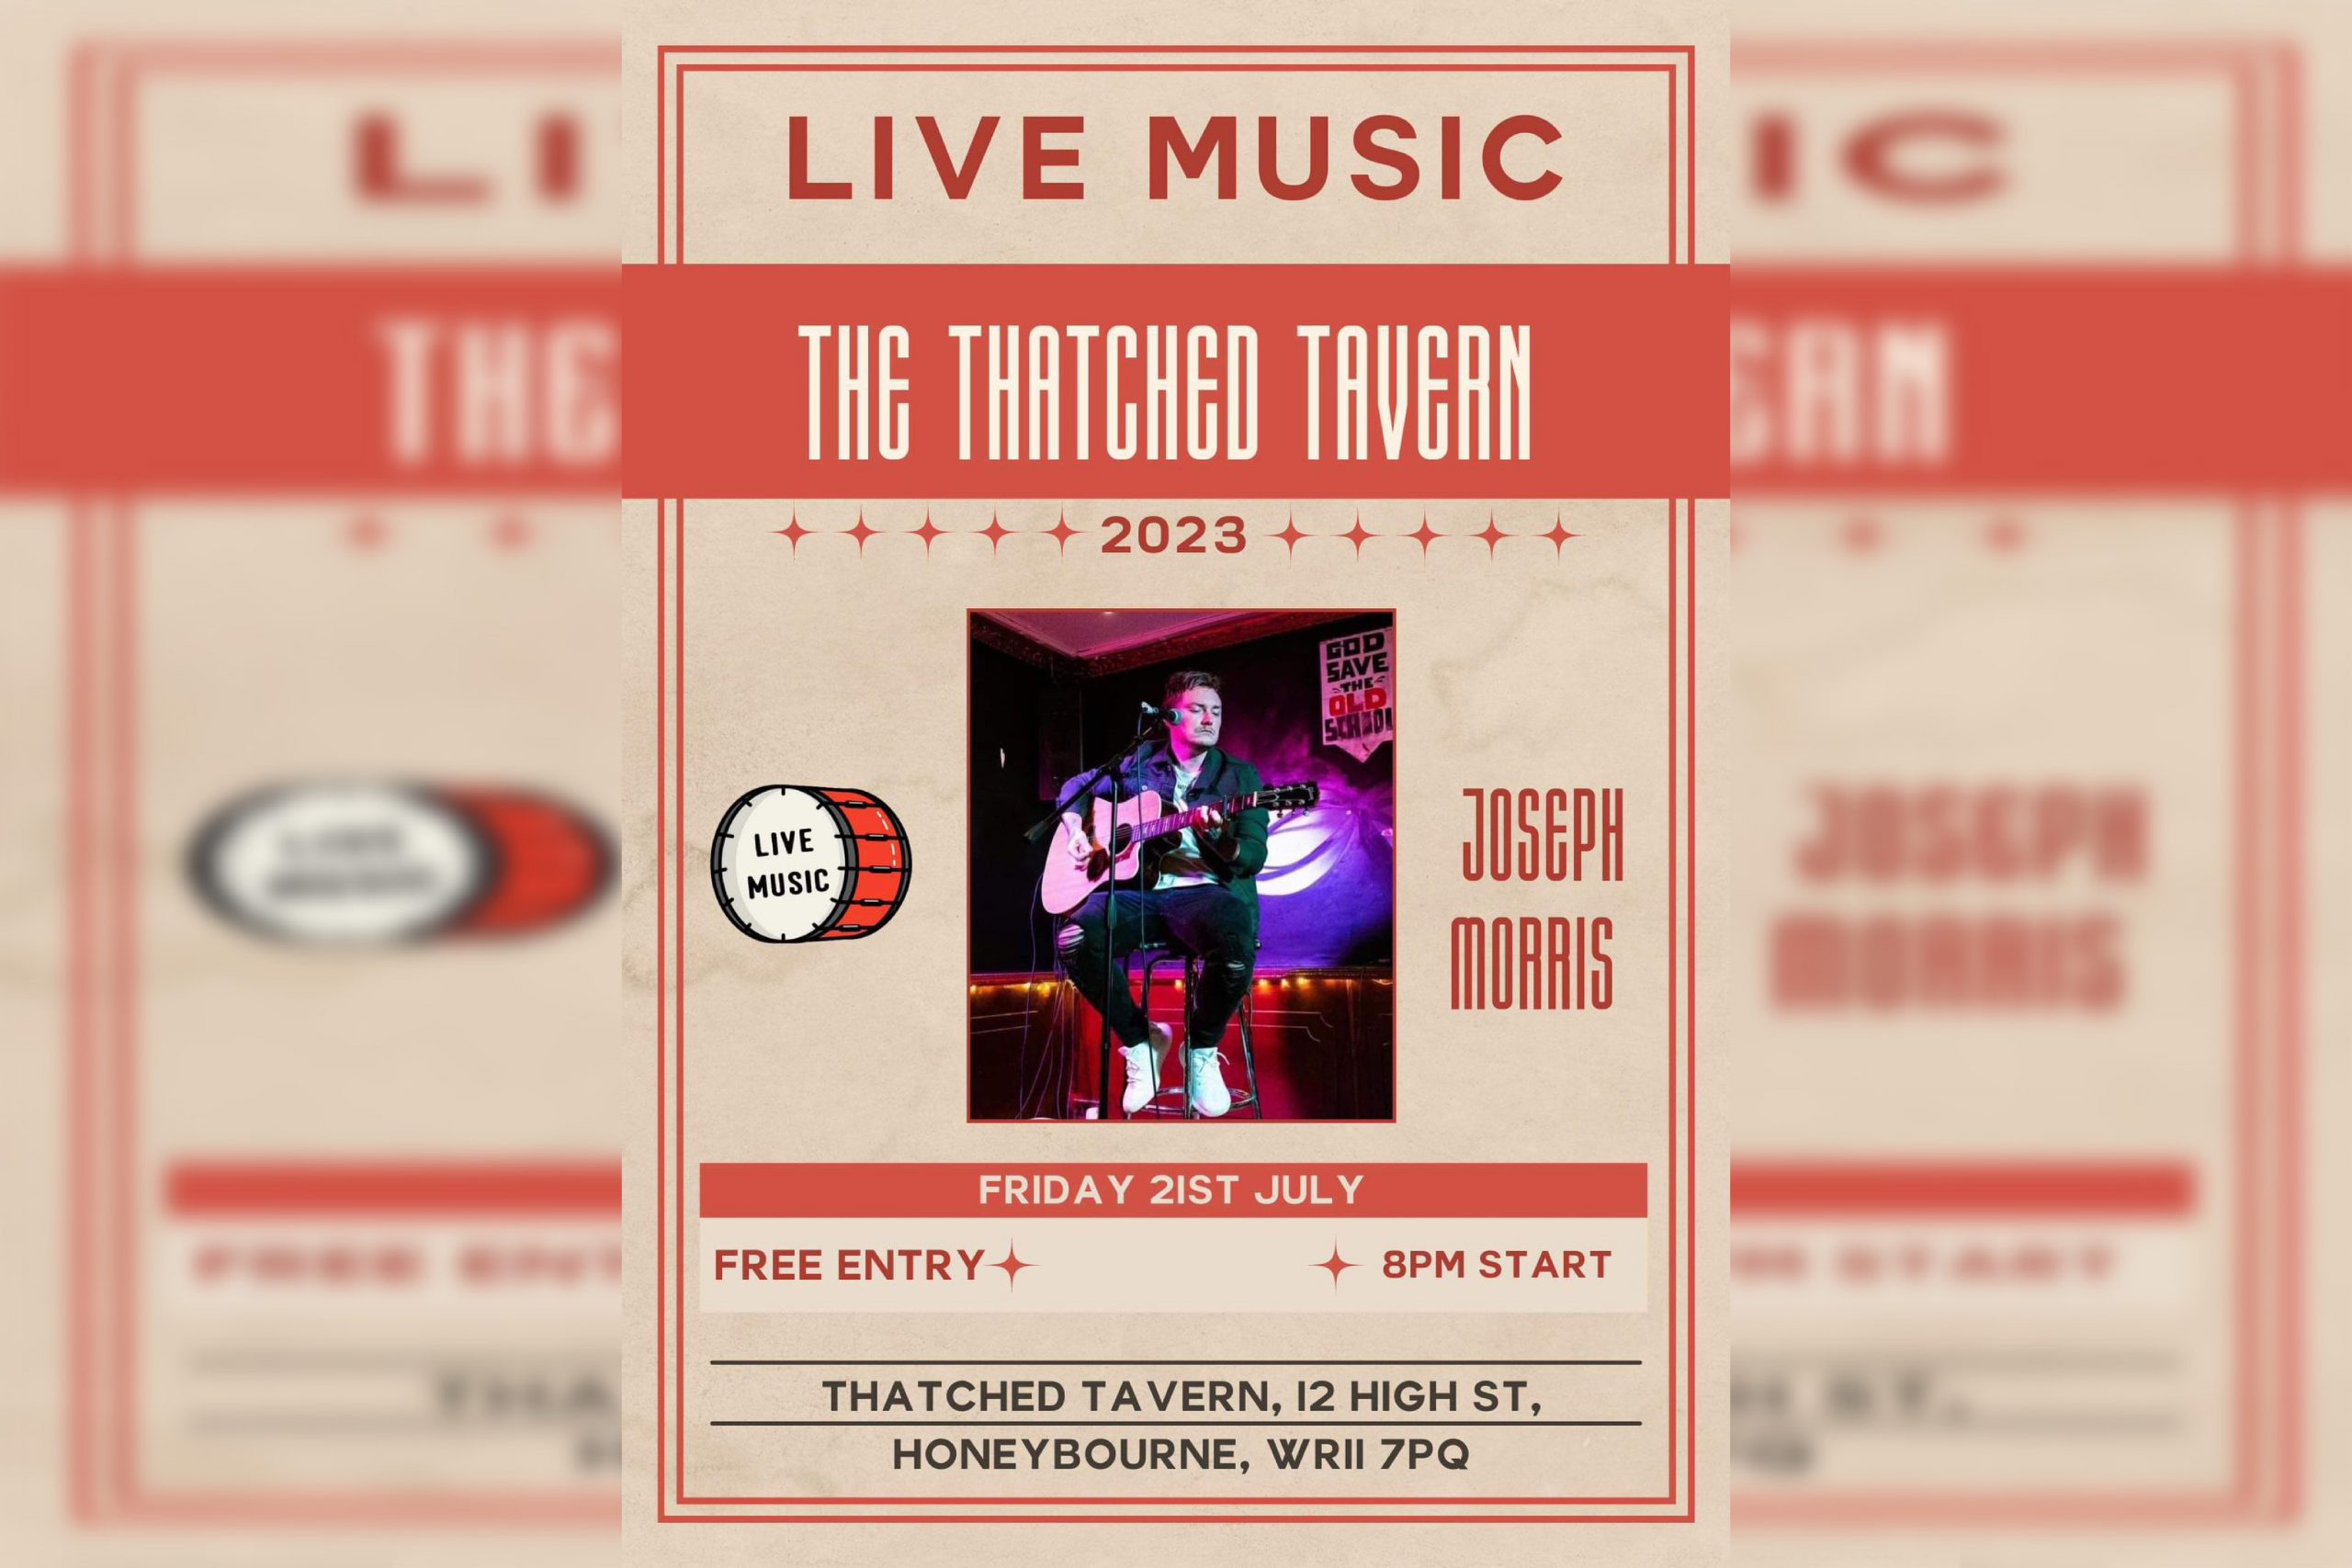 Live music performed by the amazing Joseph Morris at The Thatched Tavern Pub in Honeybourne - Friday 21st July from 8.00pm. Come and joins us for an amazing night of entertainment and warm vibes.